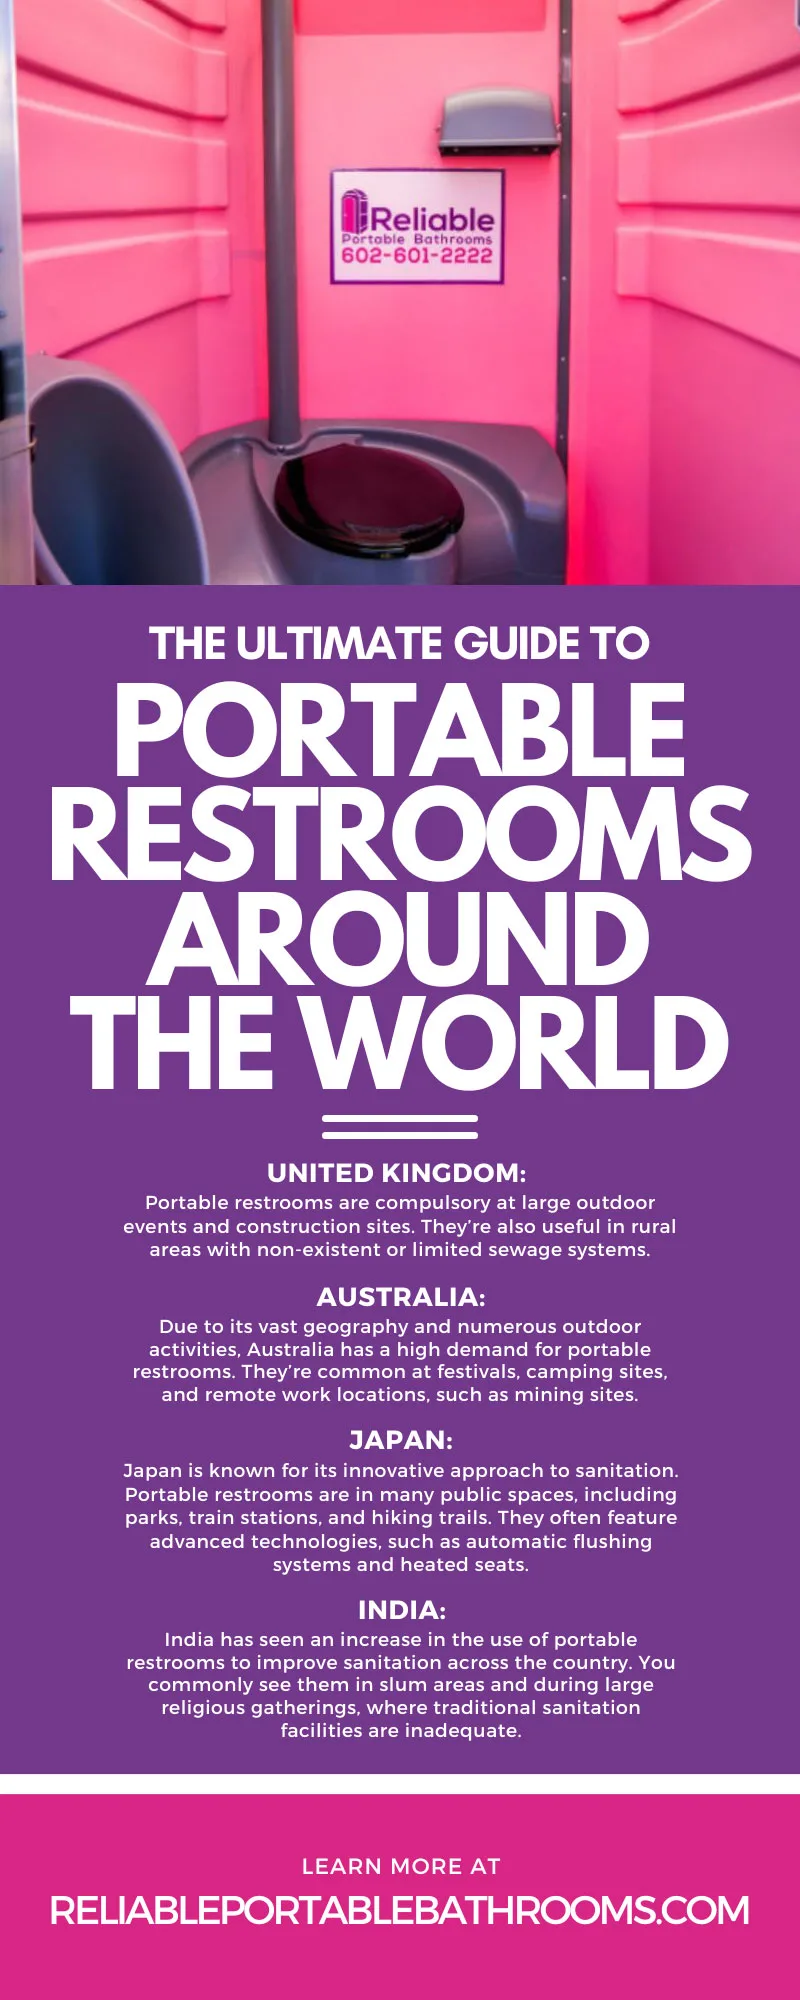 The Ultimate Guide to Portable Restrooms Around the World
